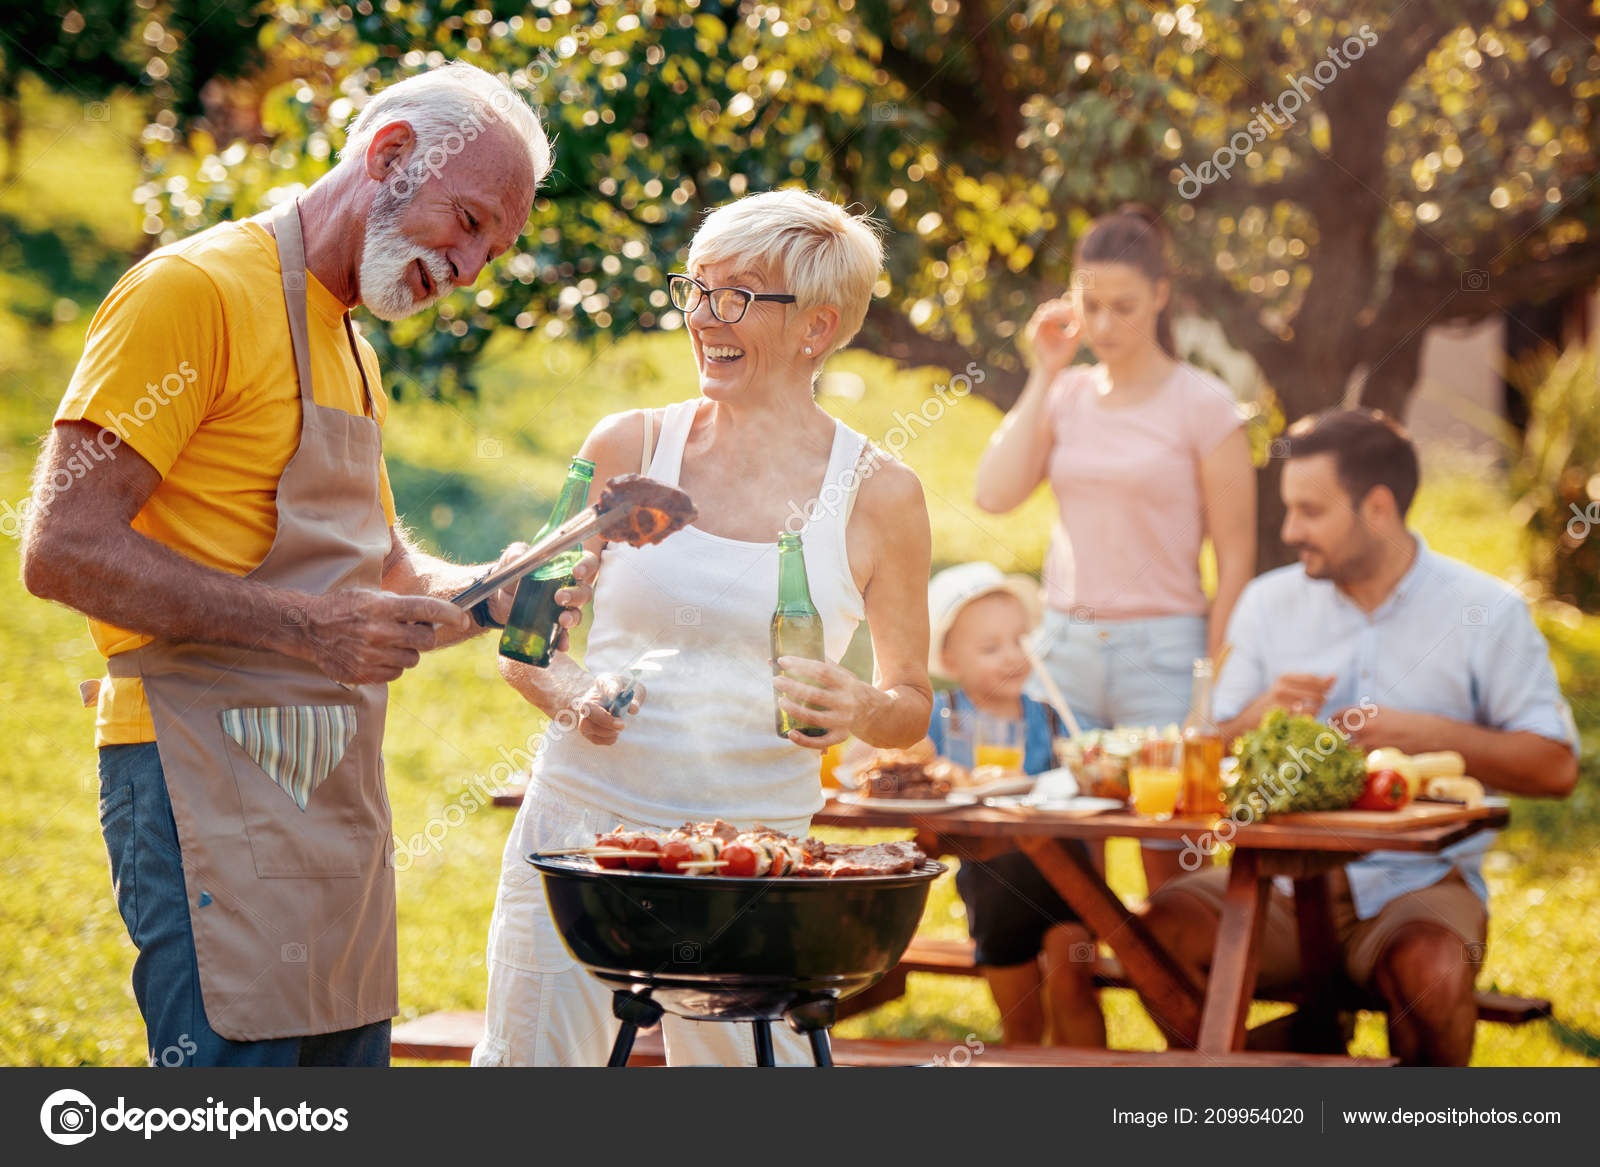 Happy Family Gathered Grill Picnic Leisure Food Family Holidays Stock Photo ©Ivanko1980 209954020